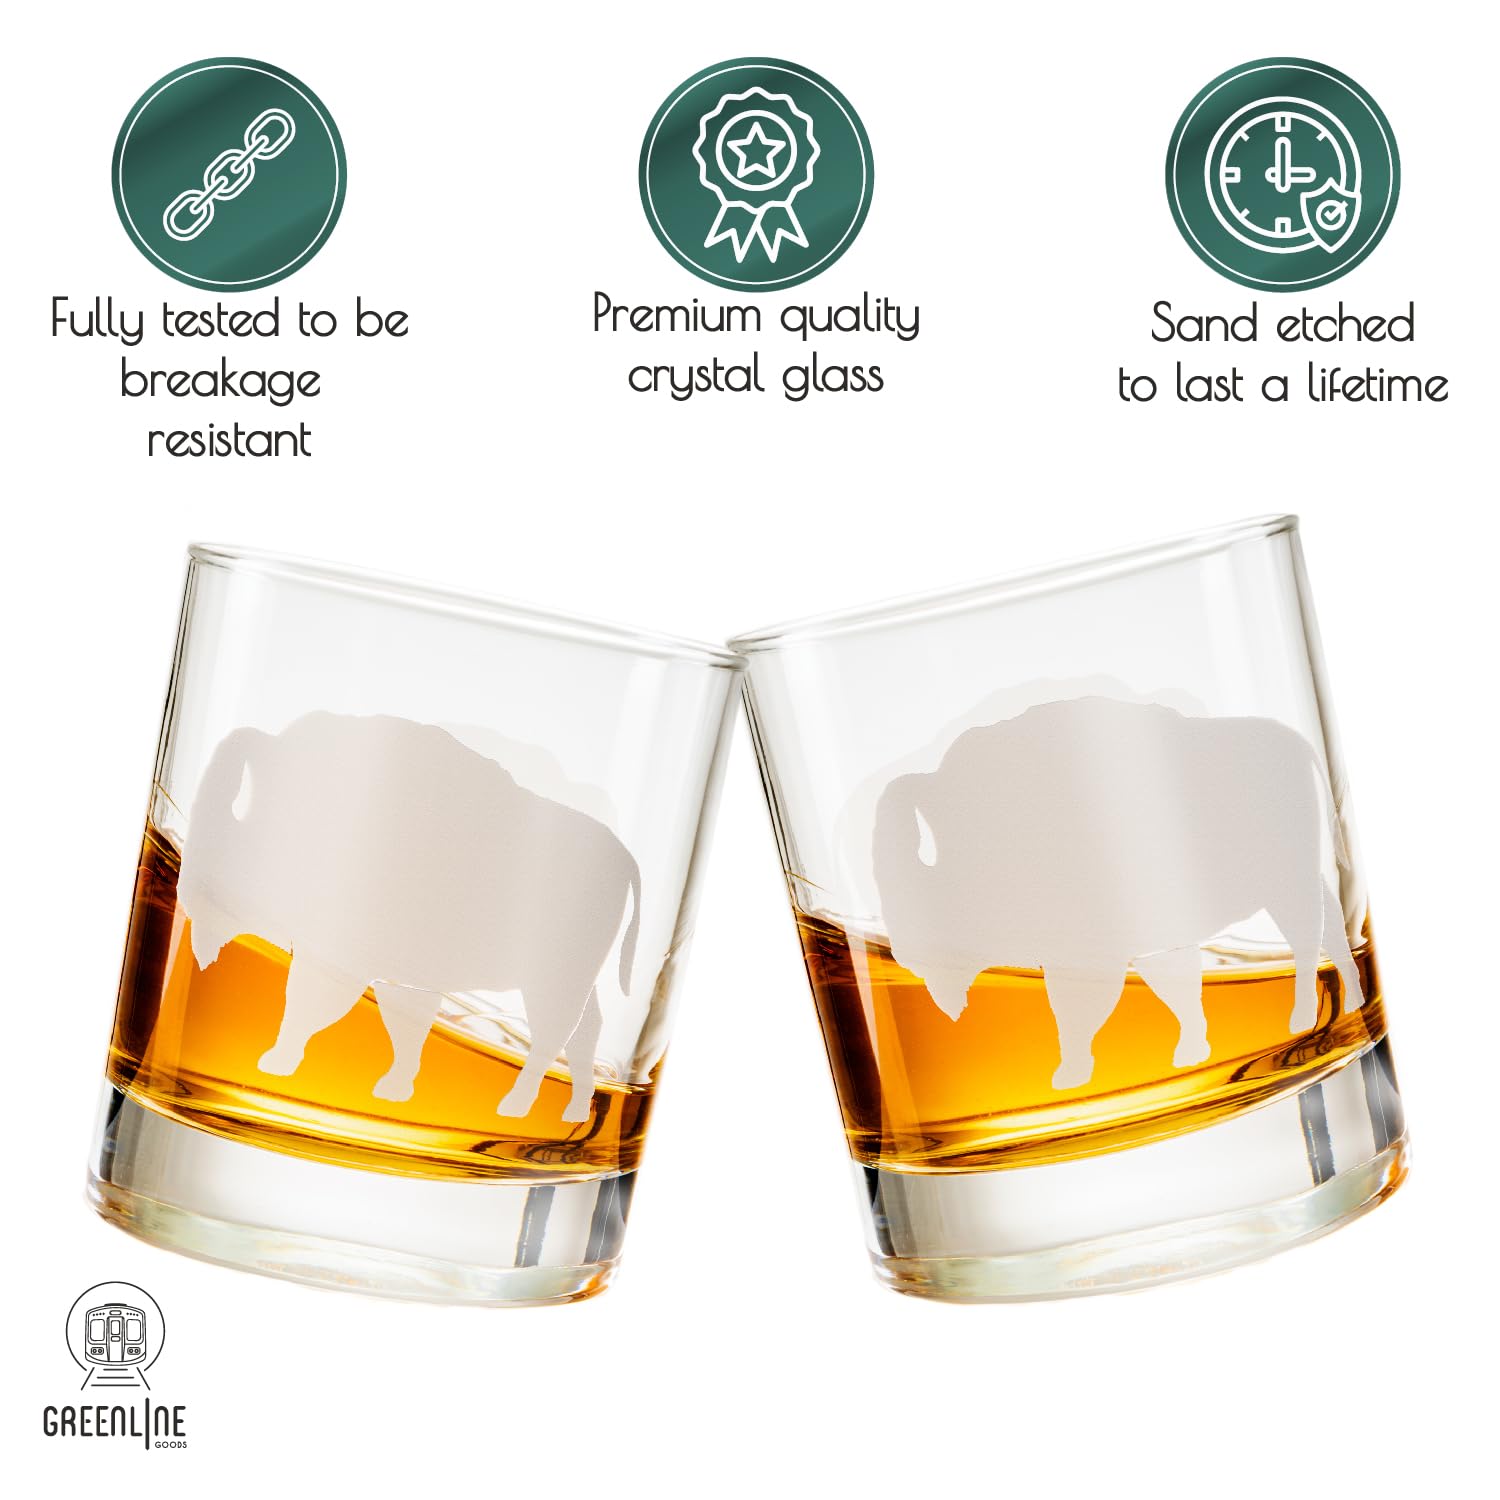 Greenline Goods Buffalo Etched Whiskey Glasses – 11 oz Set of 2 Buffalo Cocktail Glass - Old Fashioned Bar Set, Crystal Whiskey Glasses, Decor Cocktail Cabin Glasses Set - Buffalo Bourbon Glasses